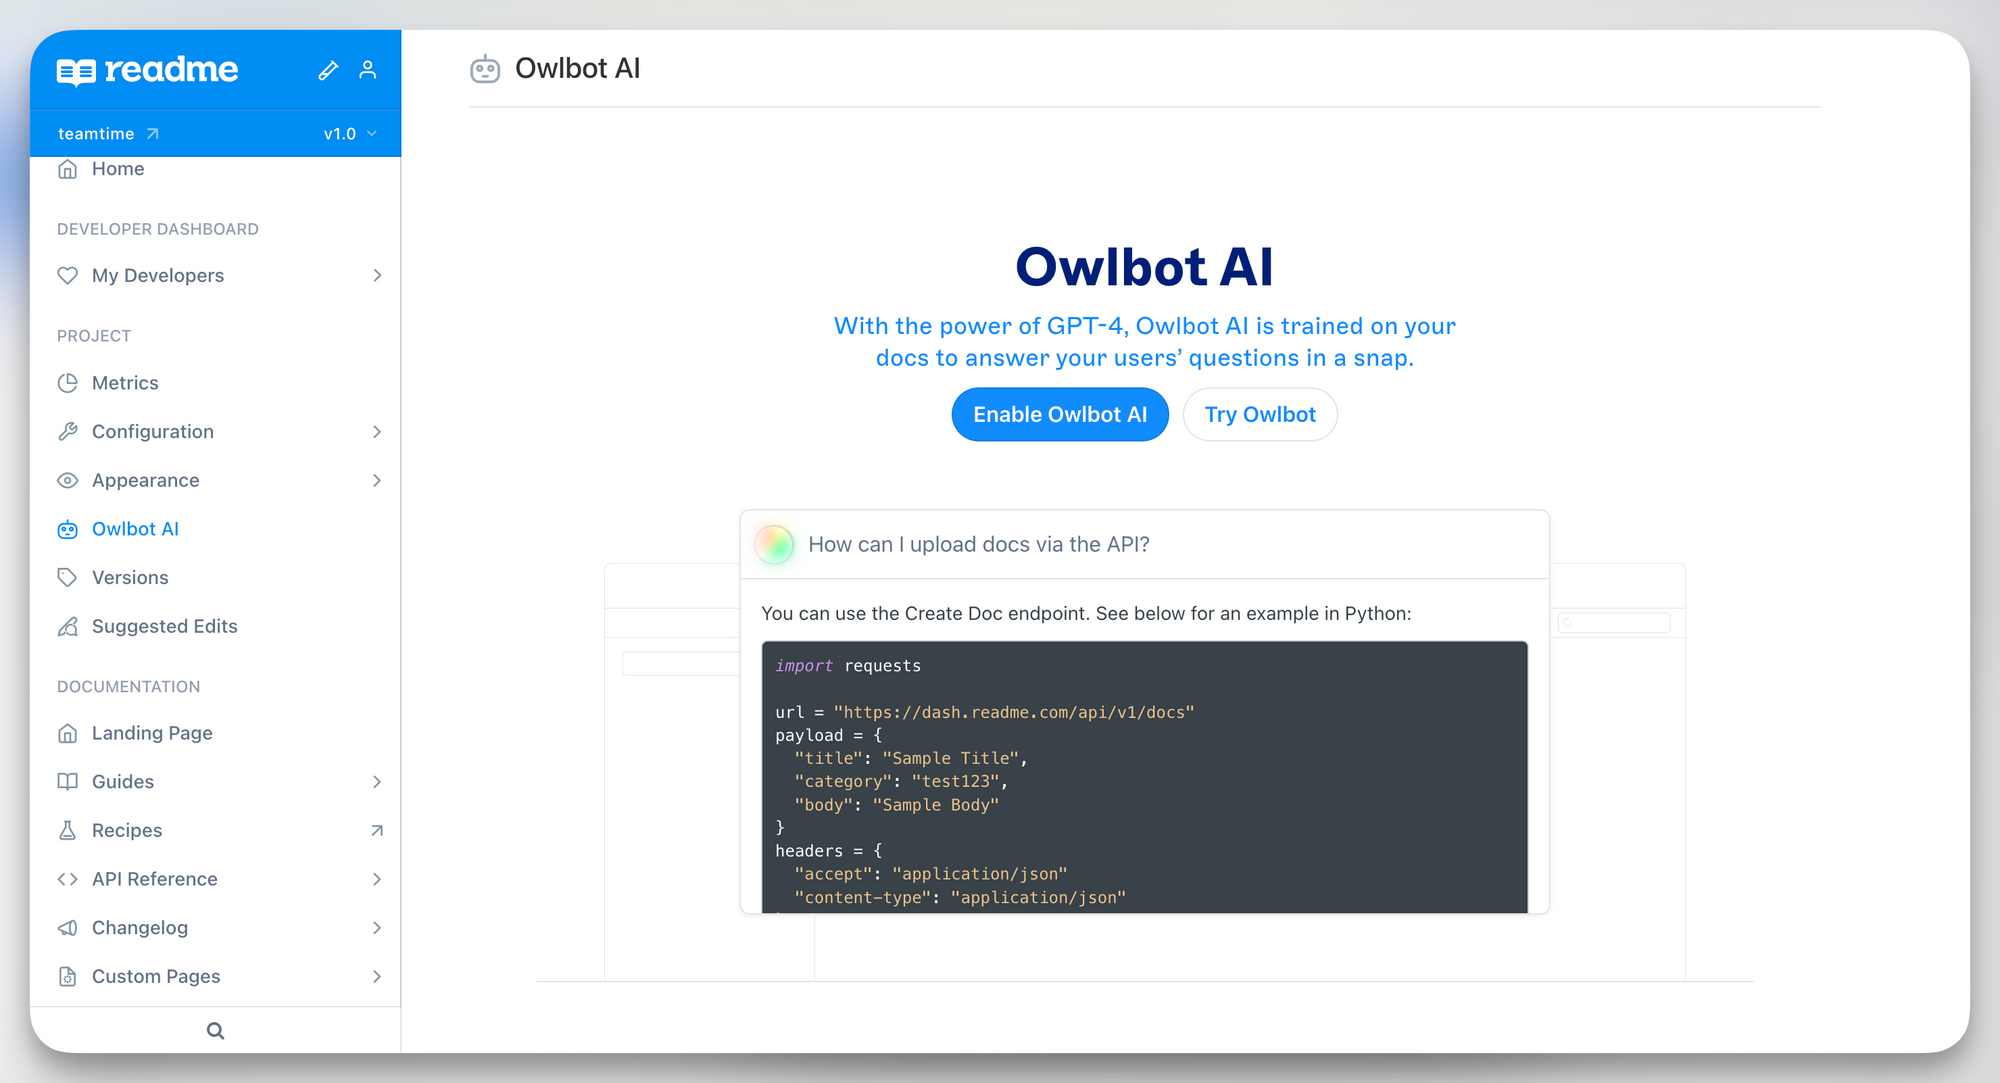 Take Your Docs to the Next Level With Owlbot AI